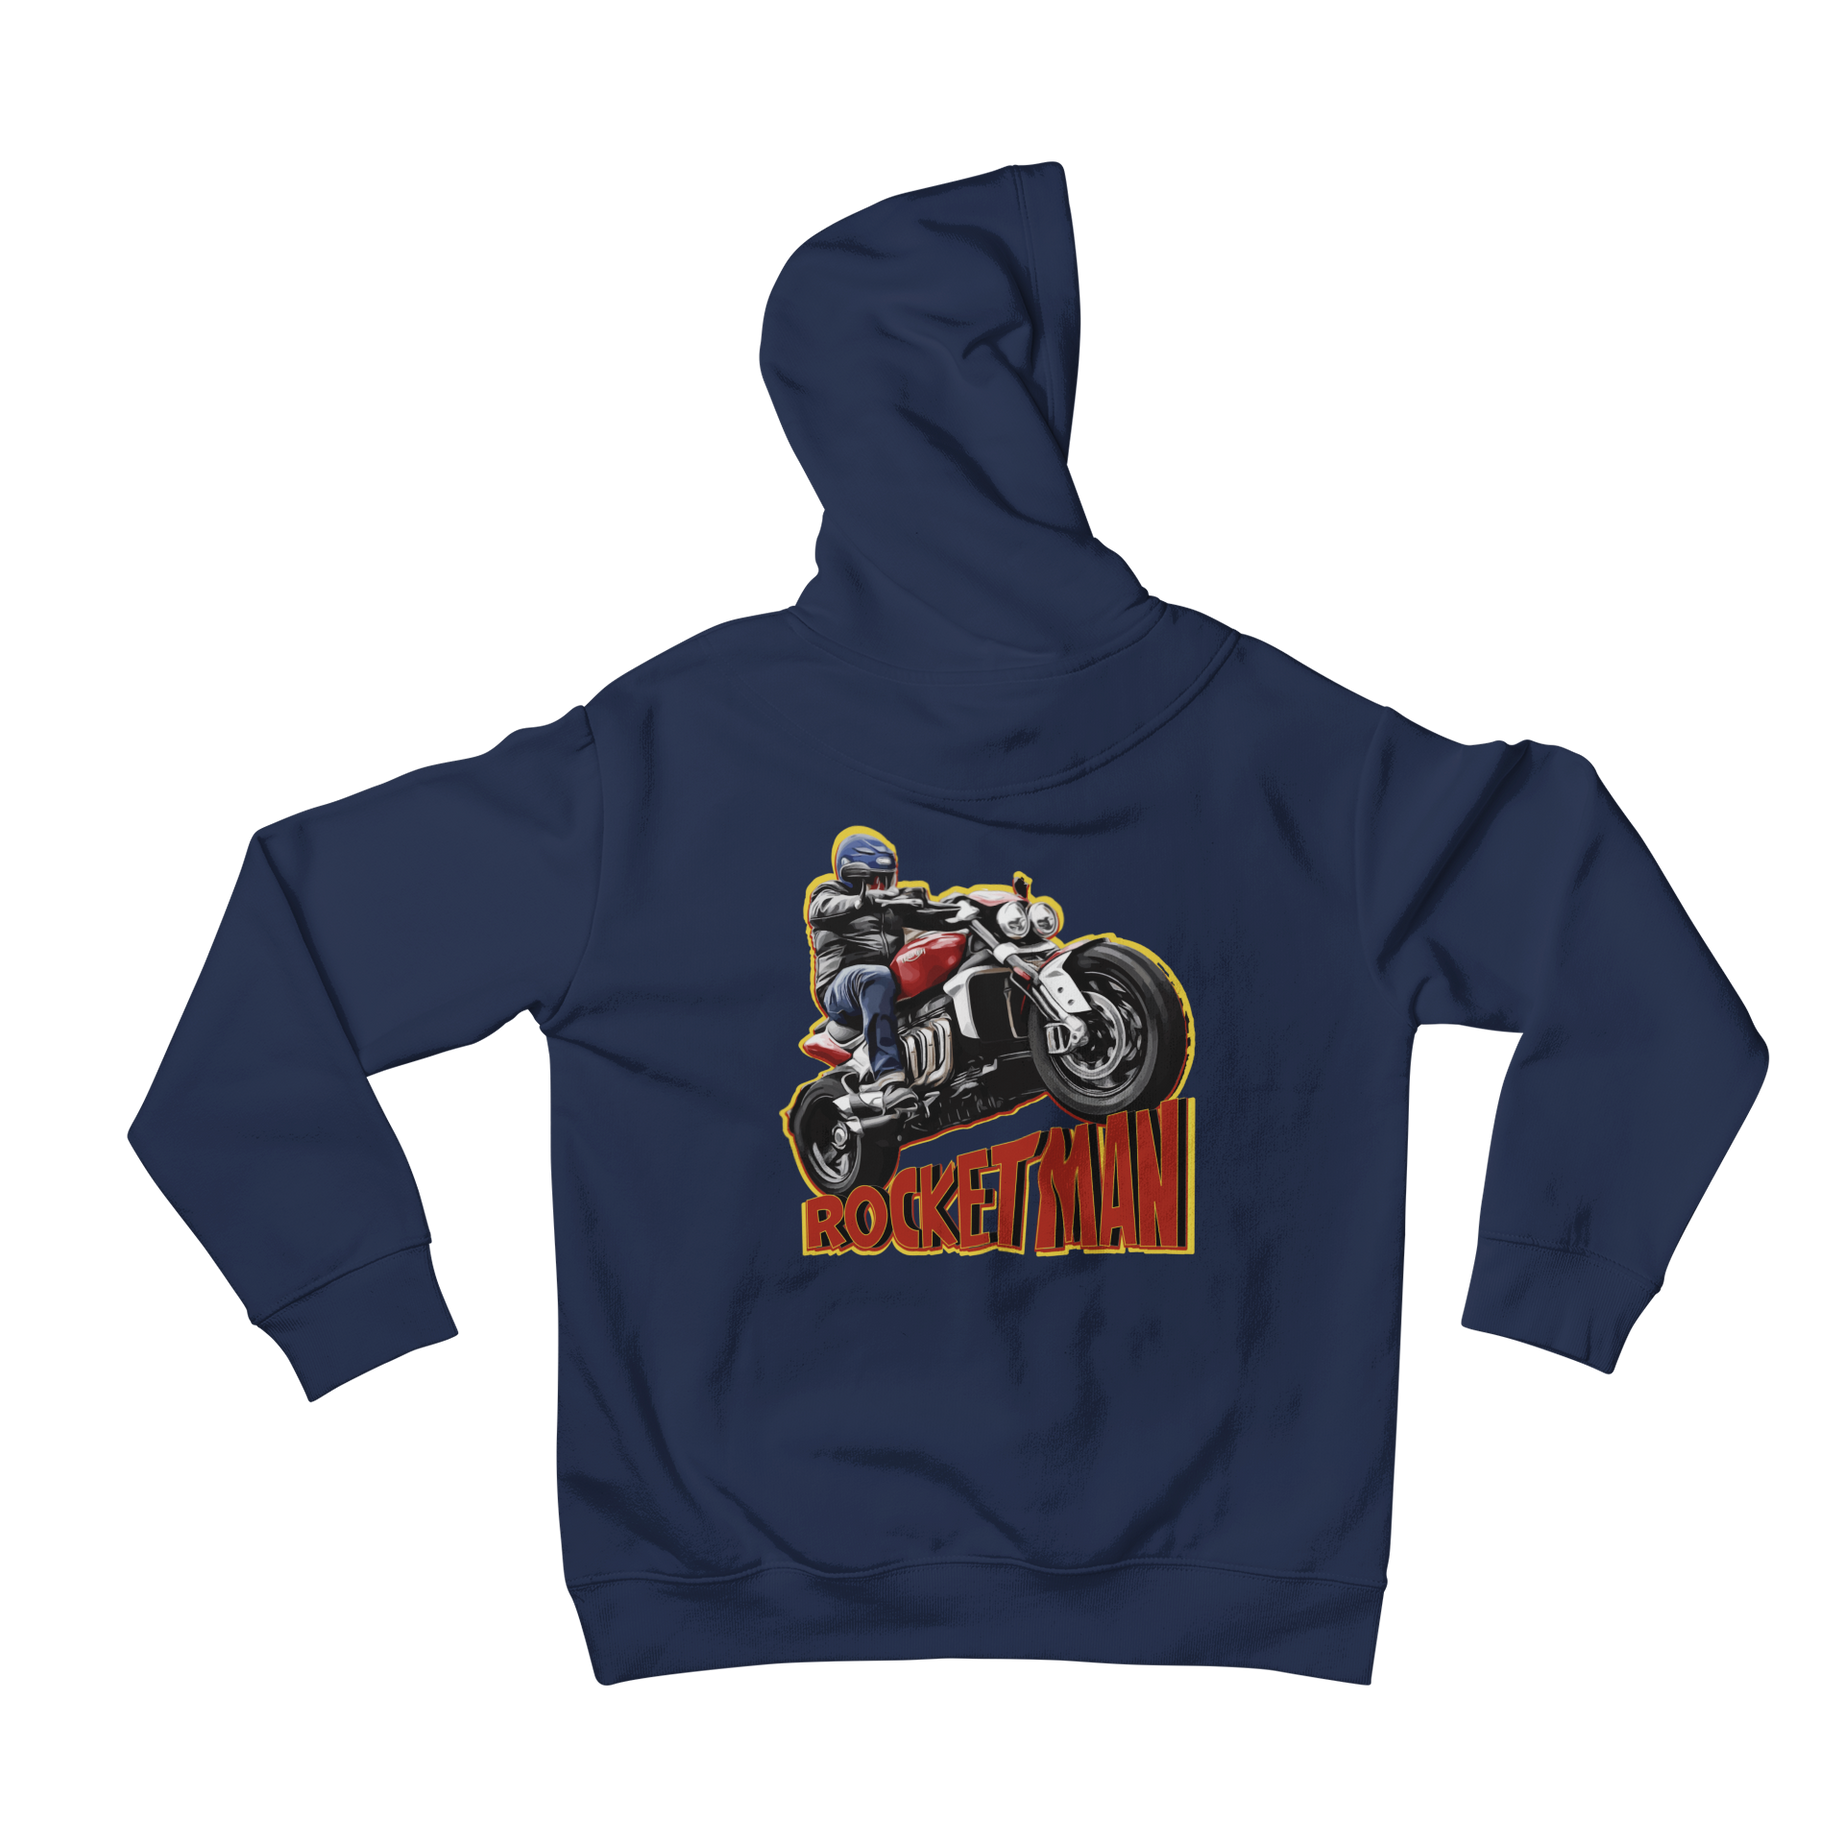 Show your love for the Legendary Triumph Behemoth with teevolution's "Rocketman" back print hoodie. Our hoodie is made with high-quality materials and designed to last. Order now and add some style to your wardrobe!